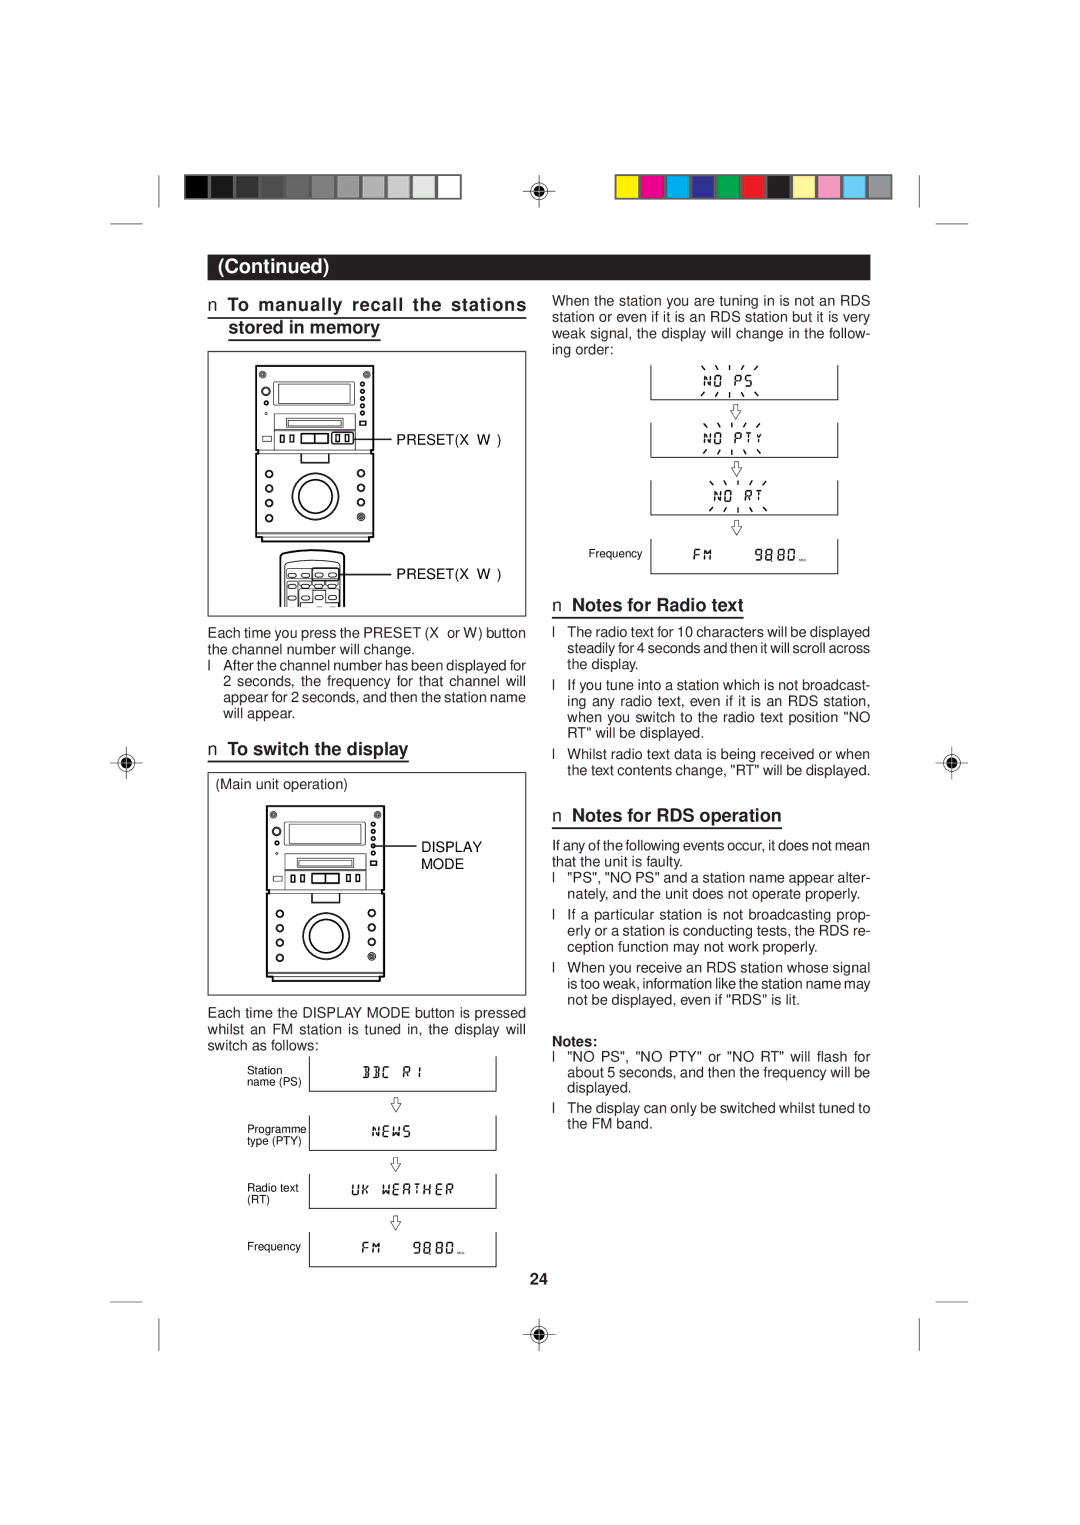 Sharp MD-M2H operation manual To manually recall the stations stored in memory, To switch the display, Presetx W 